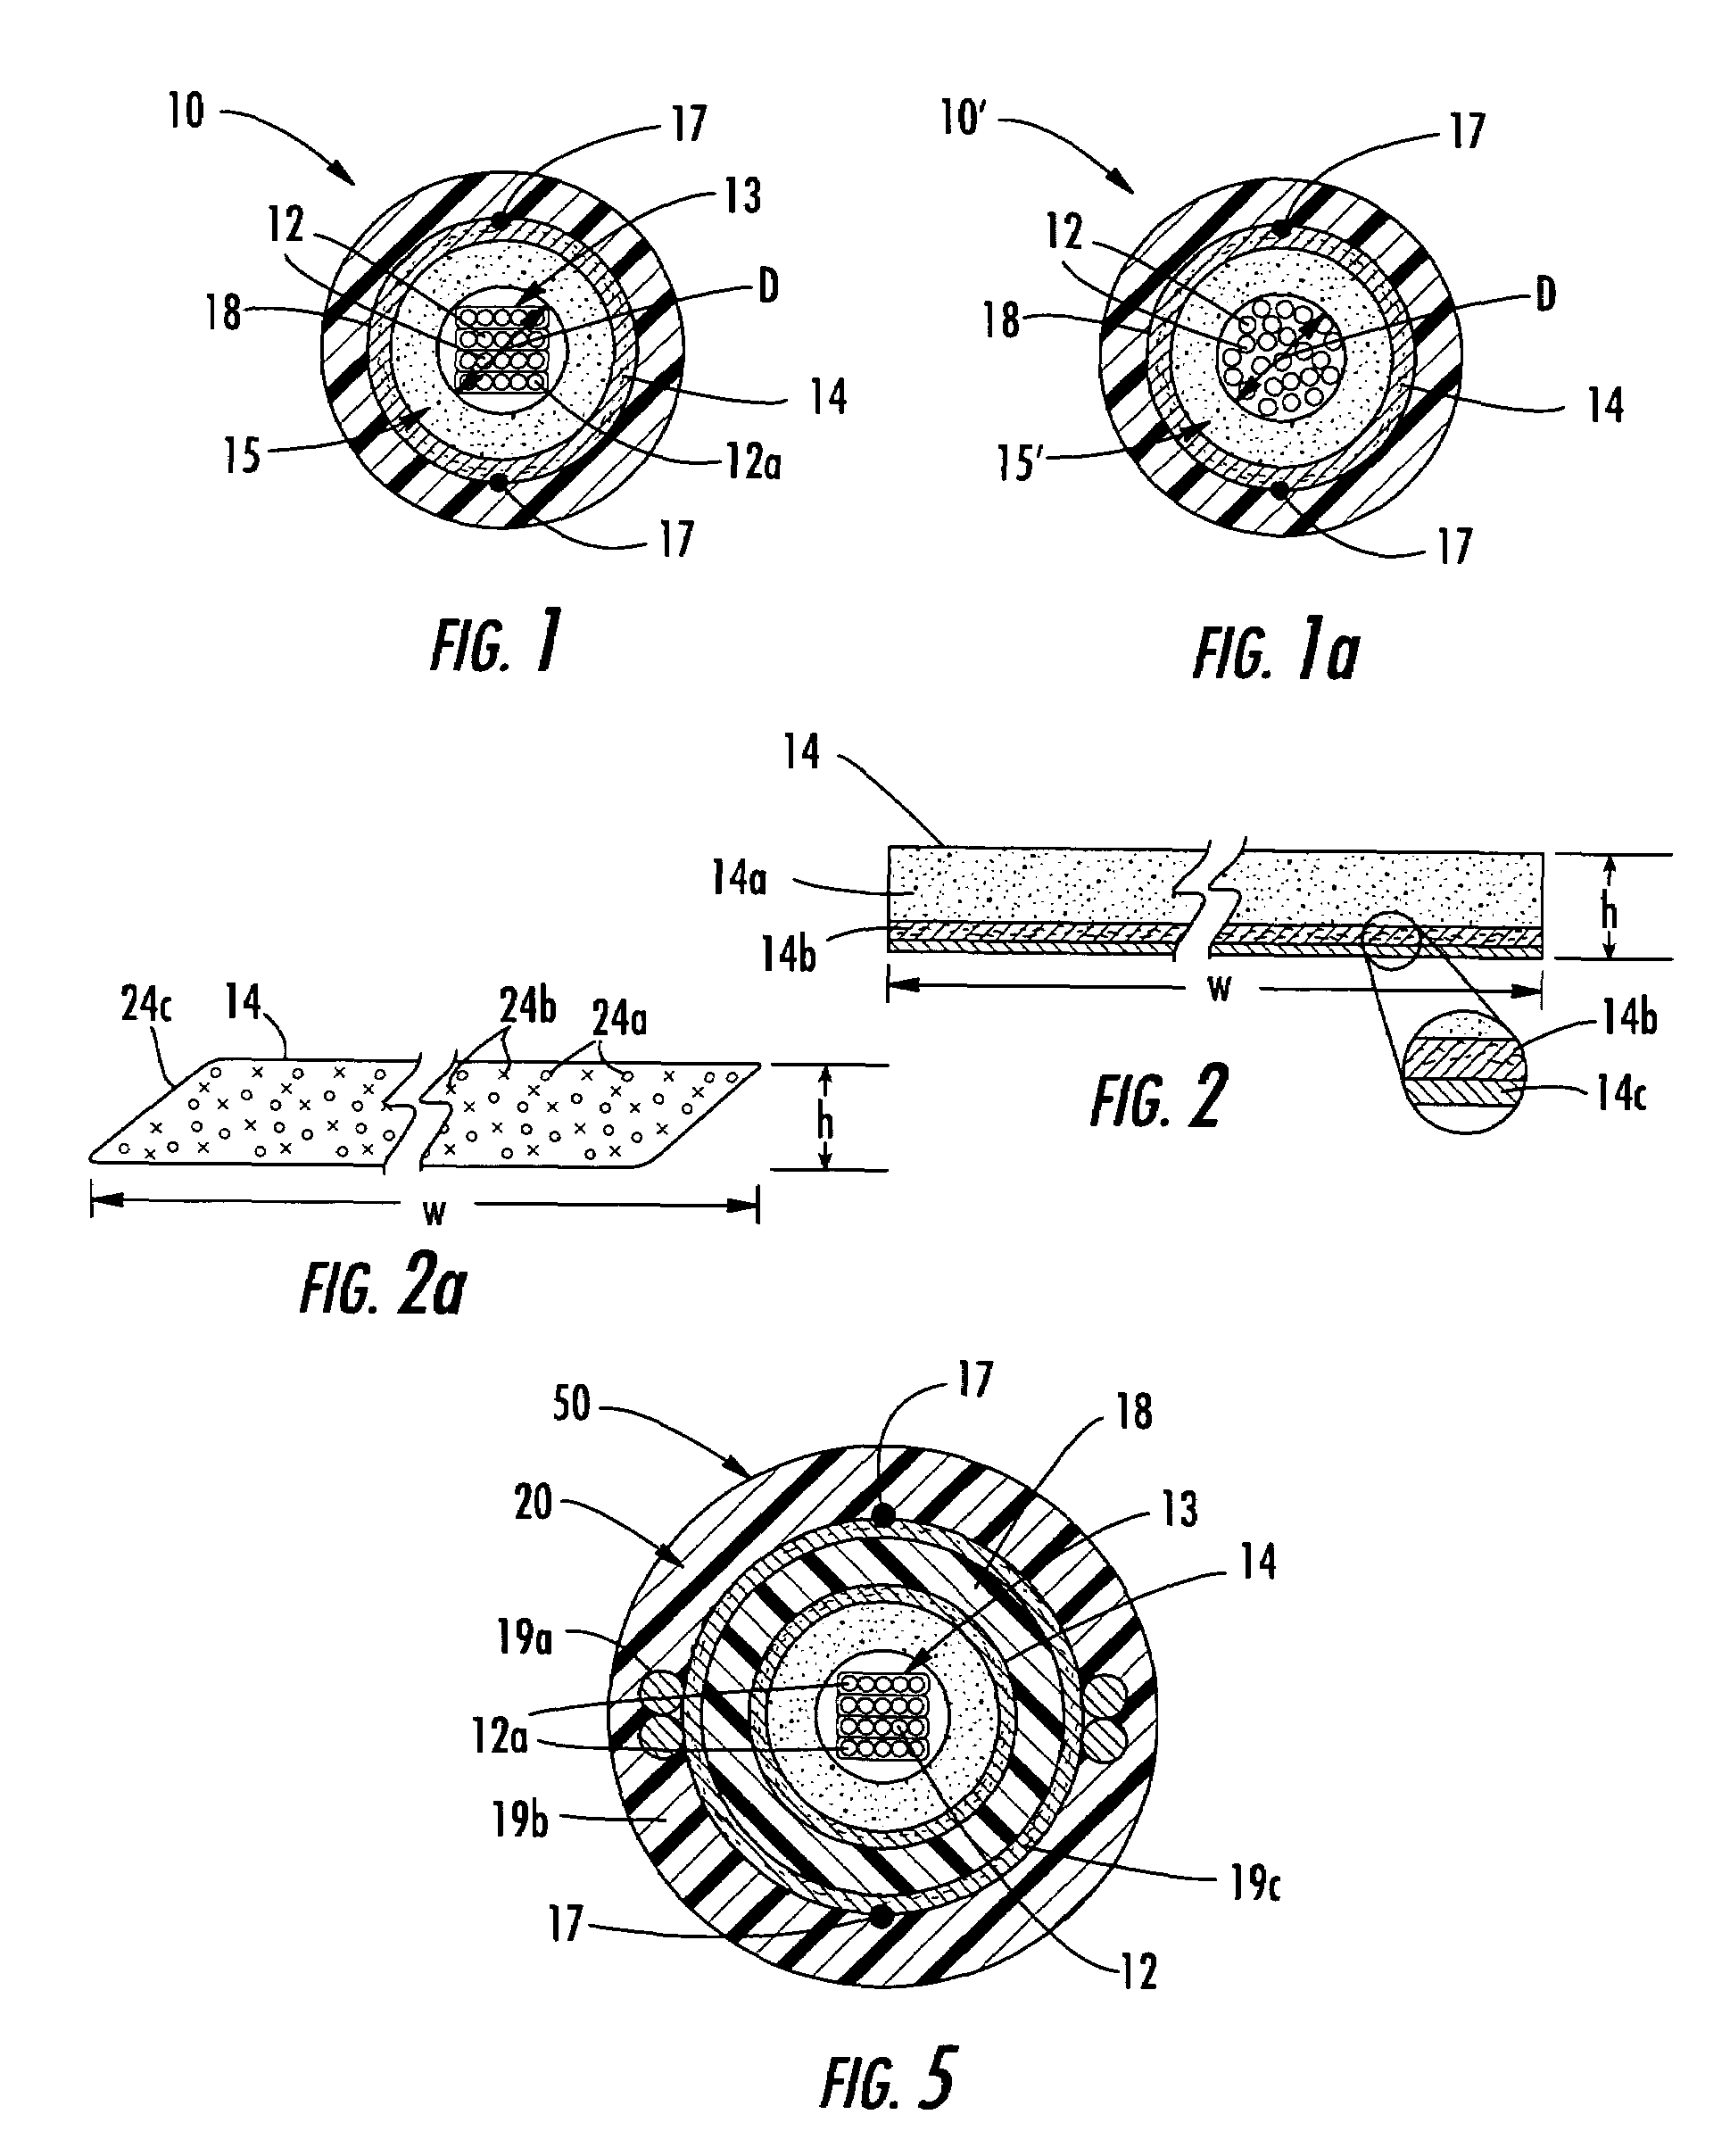 Optical tube assembly having a dry insert and methods of making the same